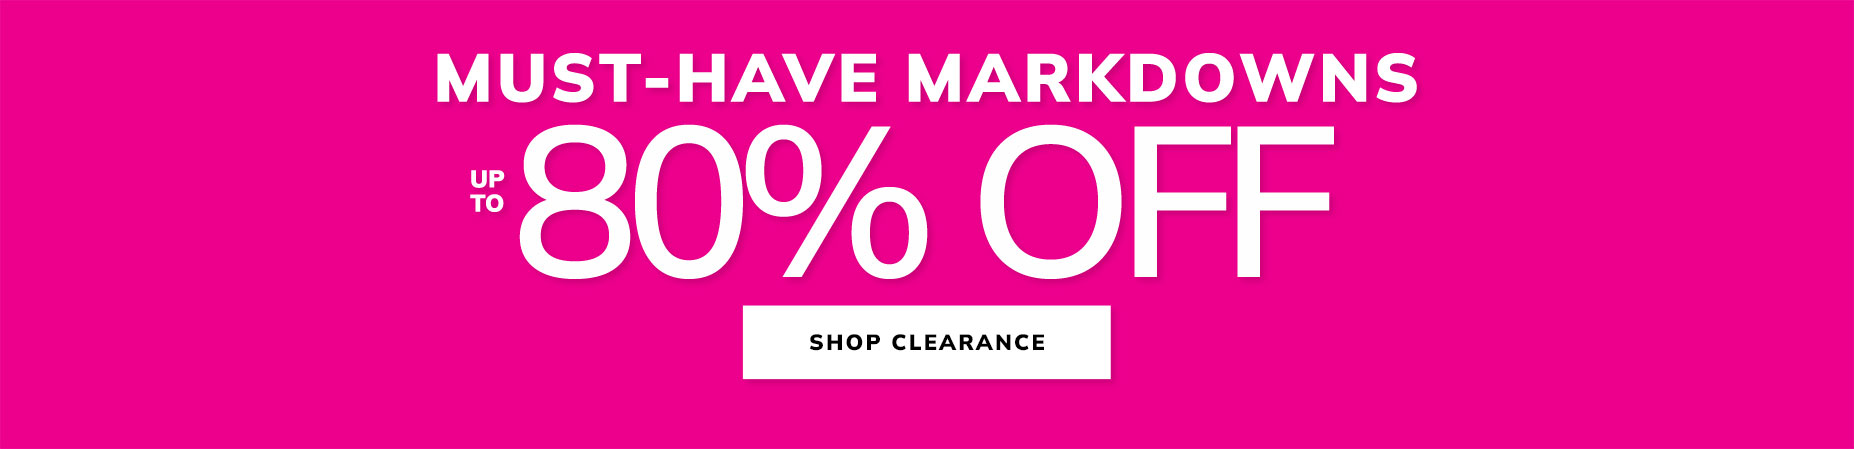 must-have markdowns upto 80% off